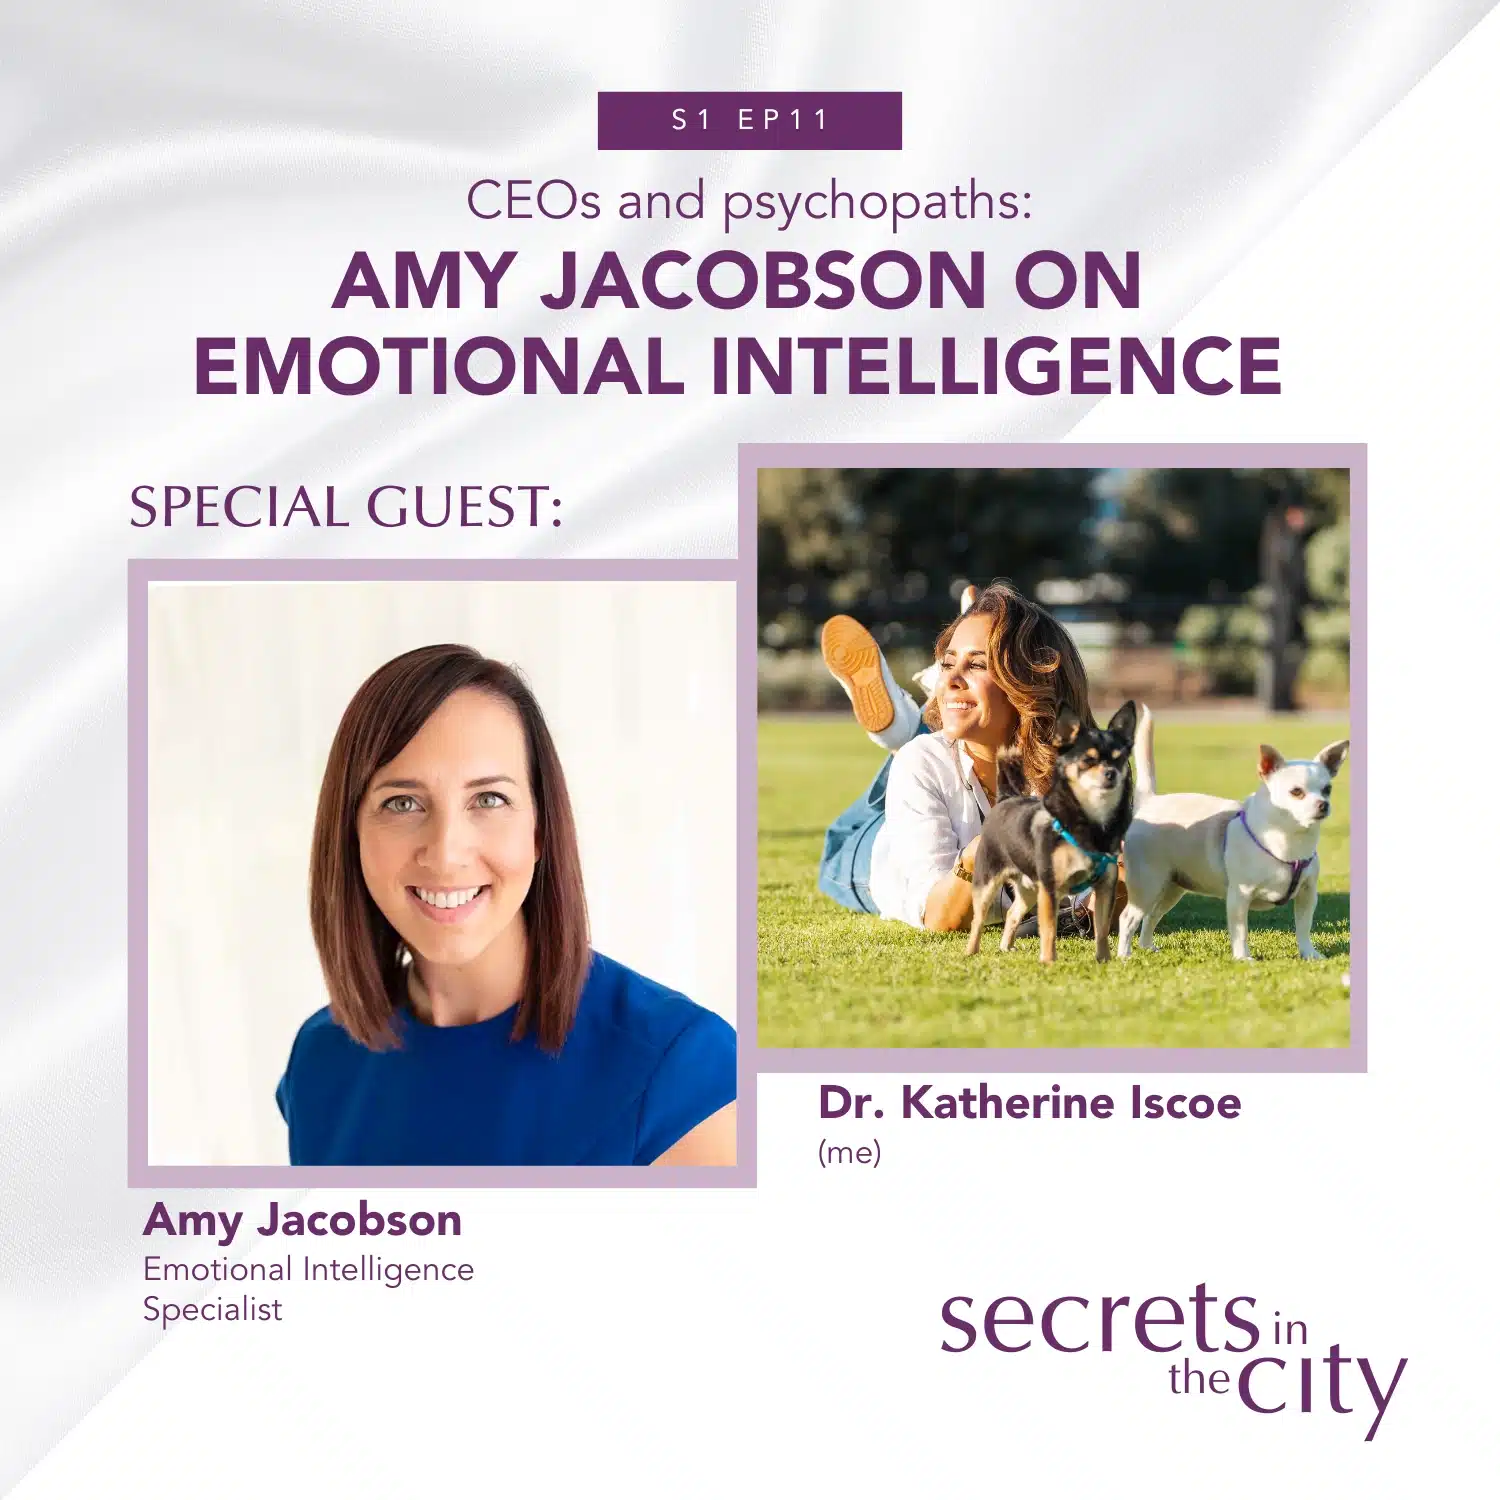 How to Build Emotional Intelligence? - Secrets in the City podcast cover featuring photos of Amy Jacobson and Dr. Katherine Iscoe